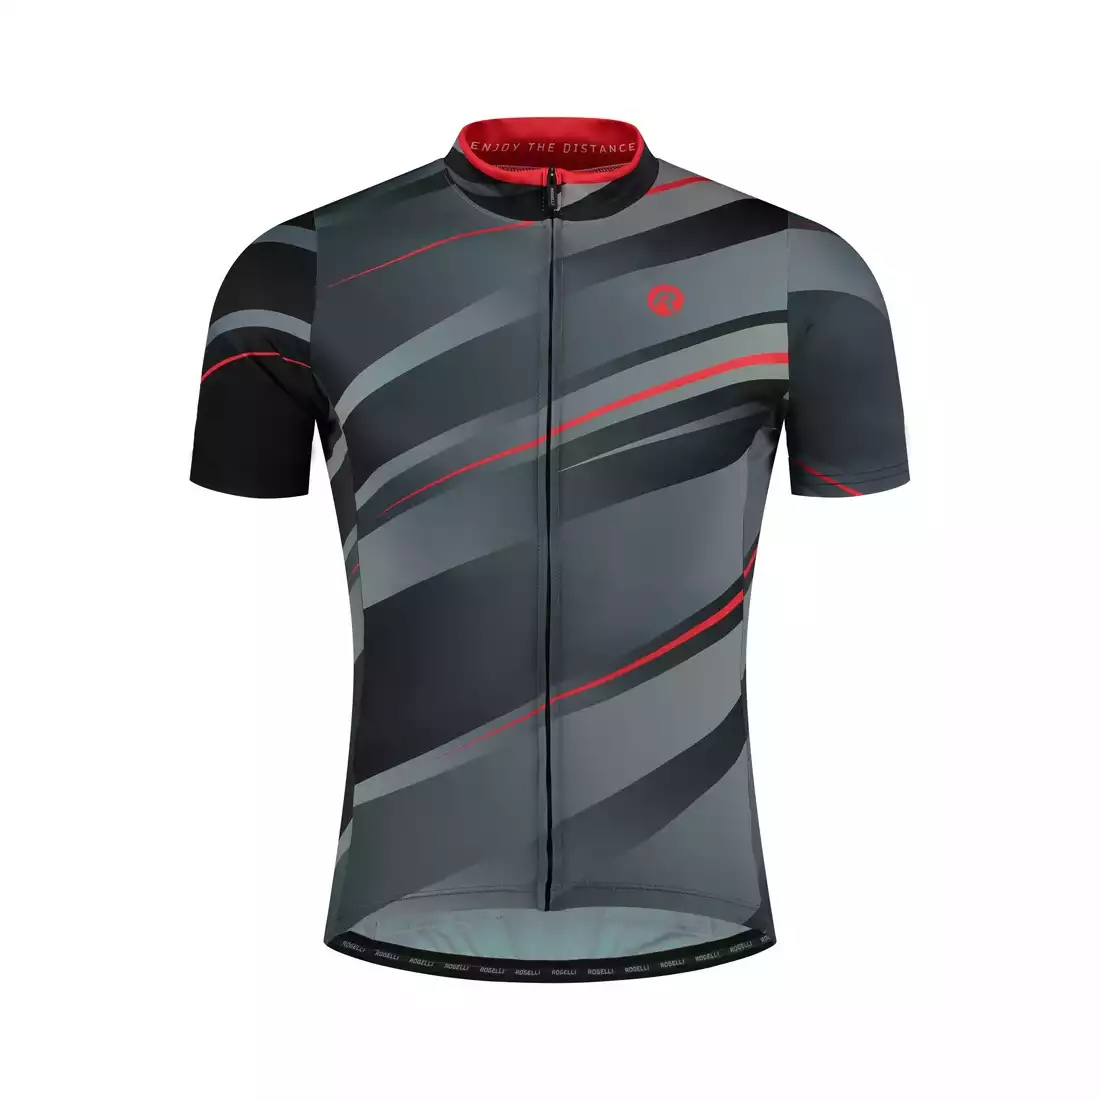 ROGELLI BUZZ Men's cycling jersey, gray and red